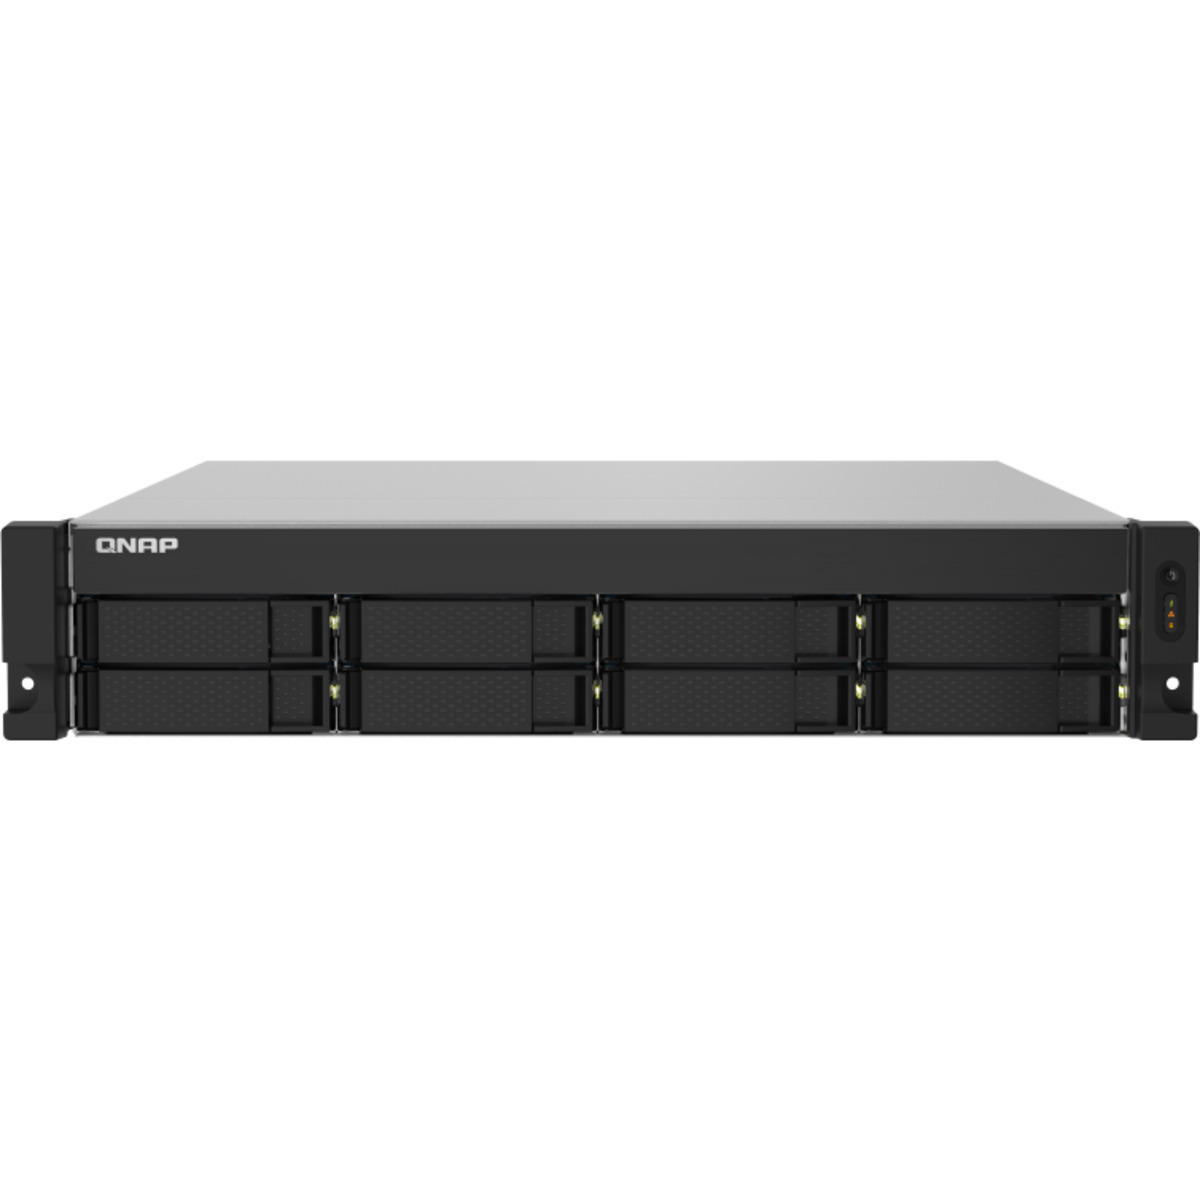 buy QNAP TS-832PXU-RP 176tb RackMount NAS - Network Attached Storage Device 8x22000gb Seagate IronWolf Pro ST22000NT001 3.5 7200rpm SATA 6Gb/s HDD NAS Class Drives Installed - Burn-In Tested - FREE RAM UPGRADE - nas headquarters buy network attached storage server device das new raid-5 free shipping simply usa TS-832PXU-RP